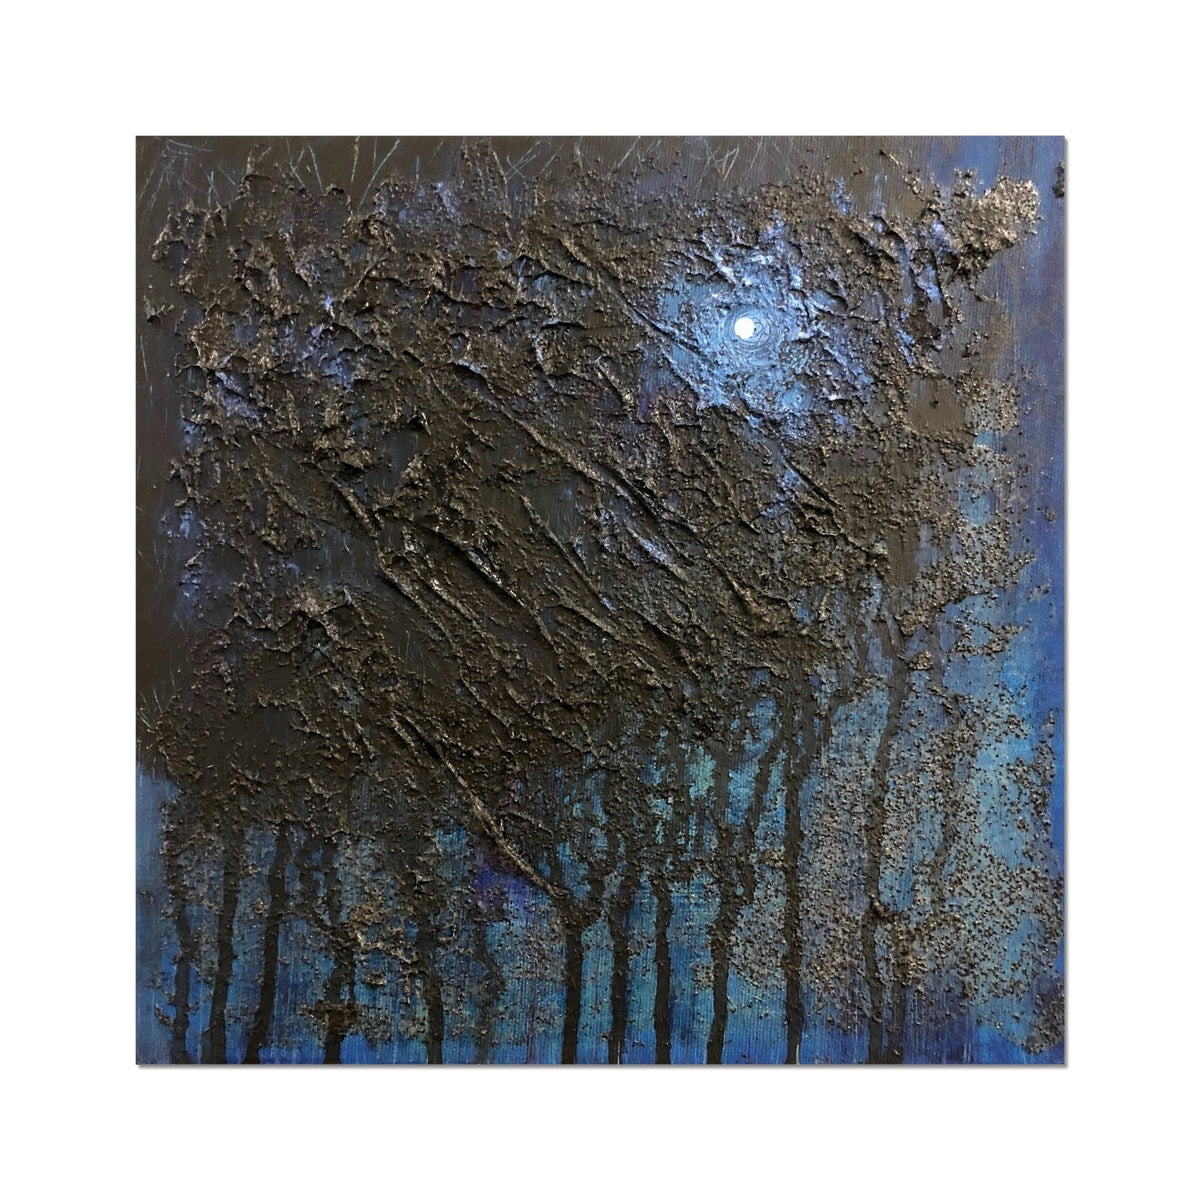 The Blue Moon Wood Abstract Painting | Fine Art Prints From Scotland-Unframed Prints-Abstract & Impressionistic Art Gallery-24"x24"-Paintings, Prints, Homeware, Art Gifts From Scotland By Scottish Artist Kevin Hunter